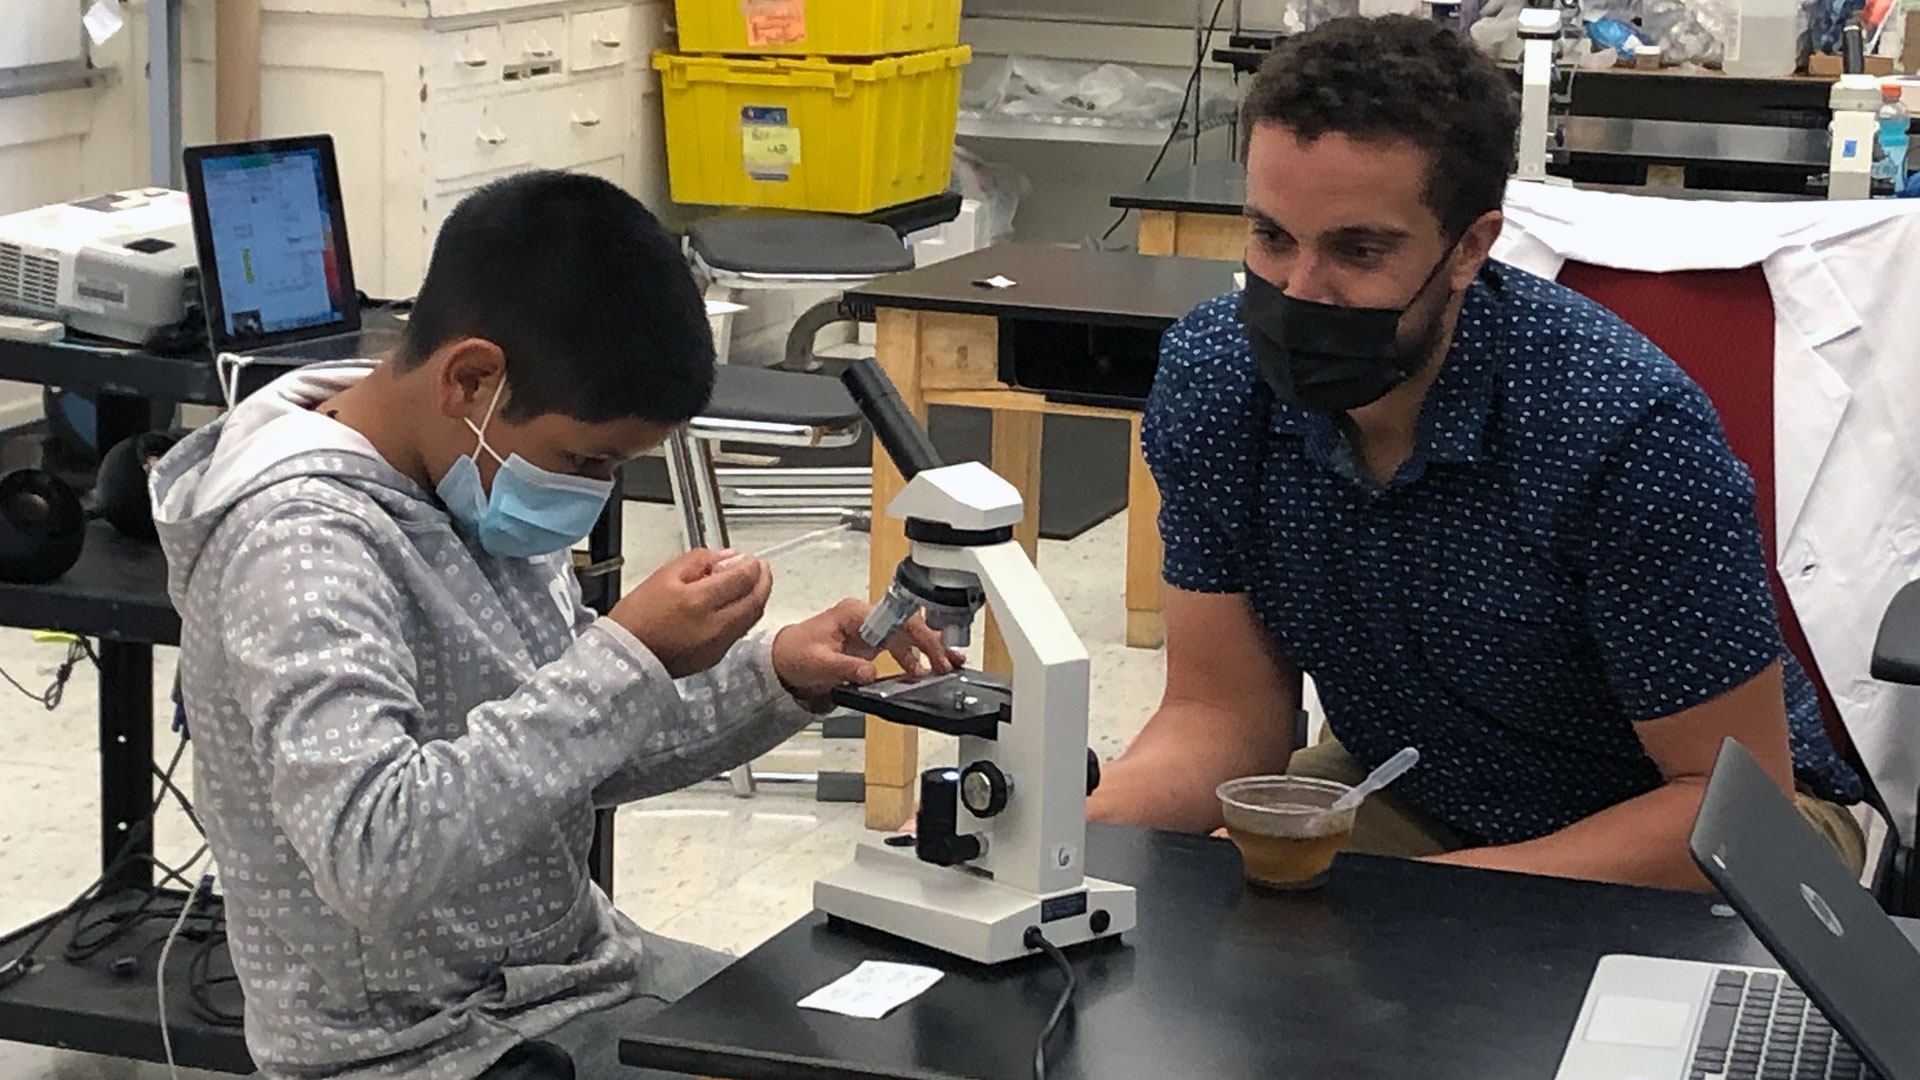 Sixth grade science teacher Patrick Messac helps a student with his microscope.